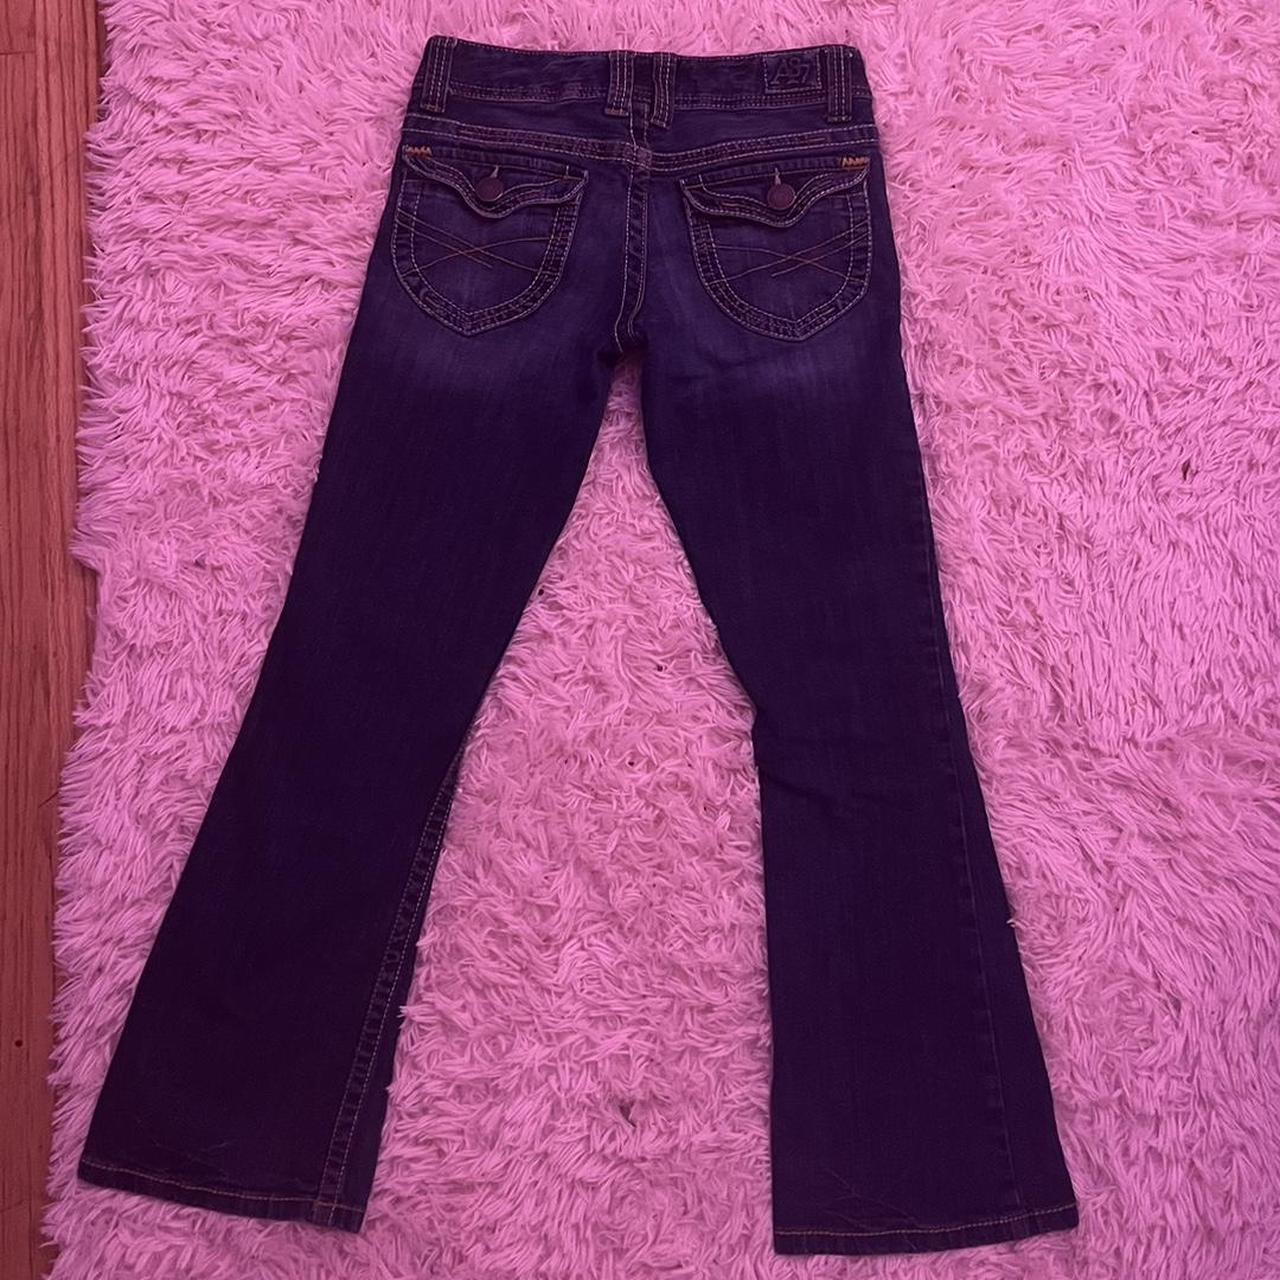 Early 2000s Aeropostale low rise flare jeans. Super... - Depop